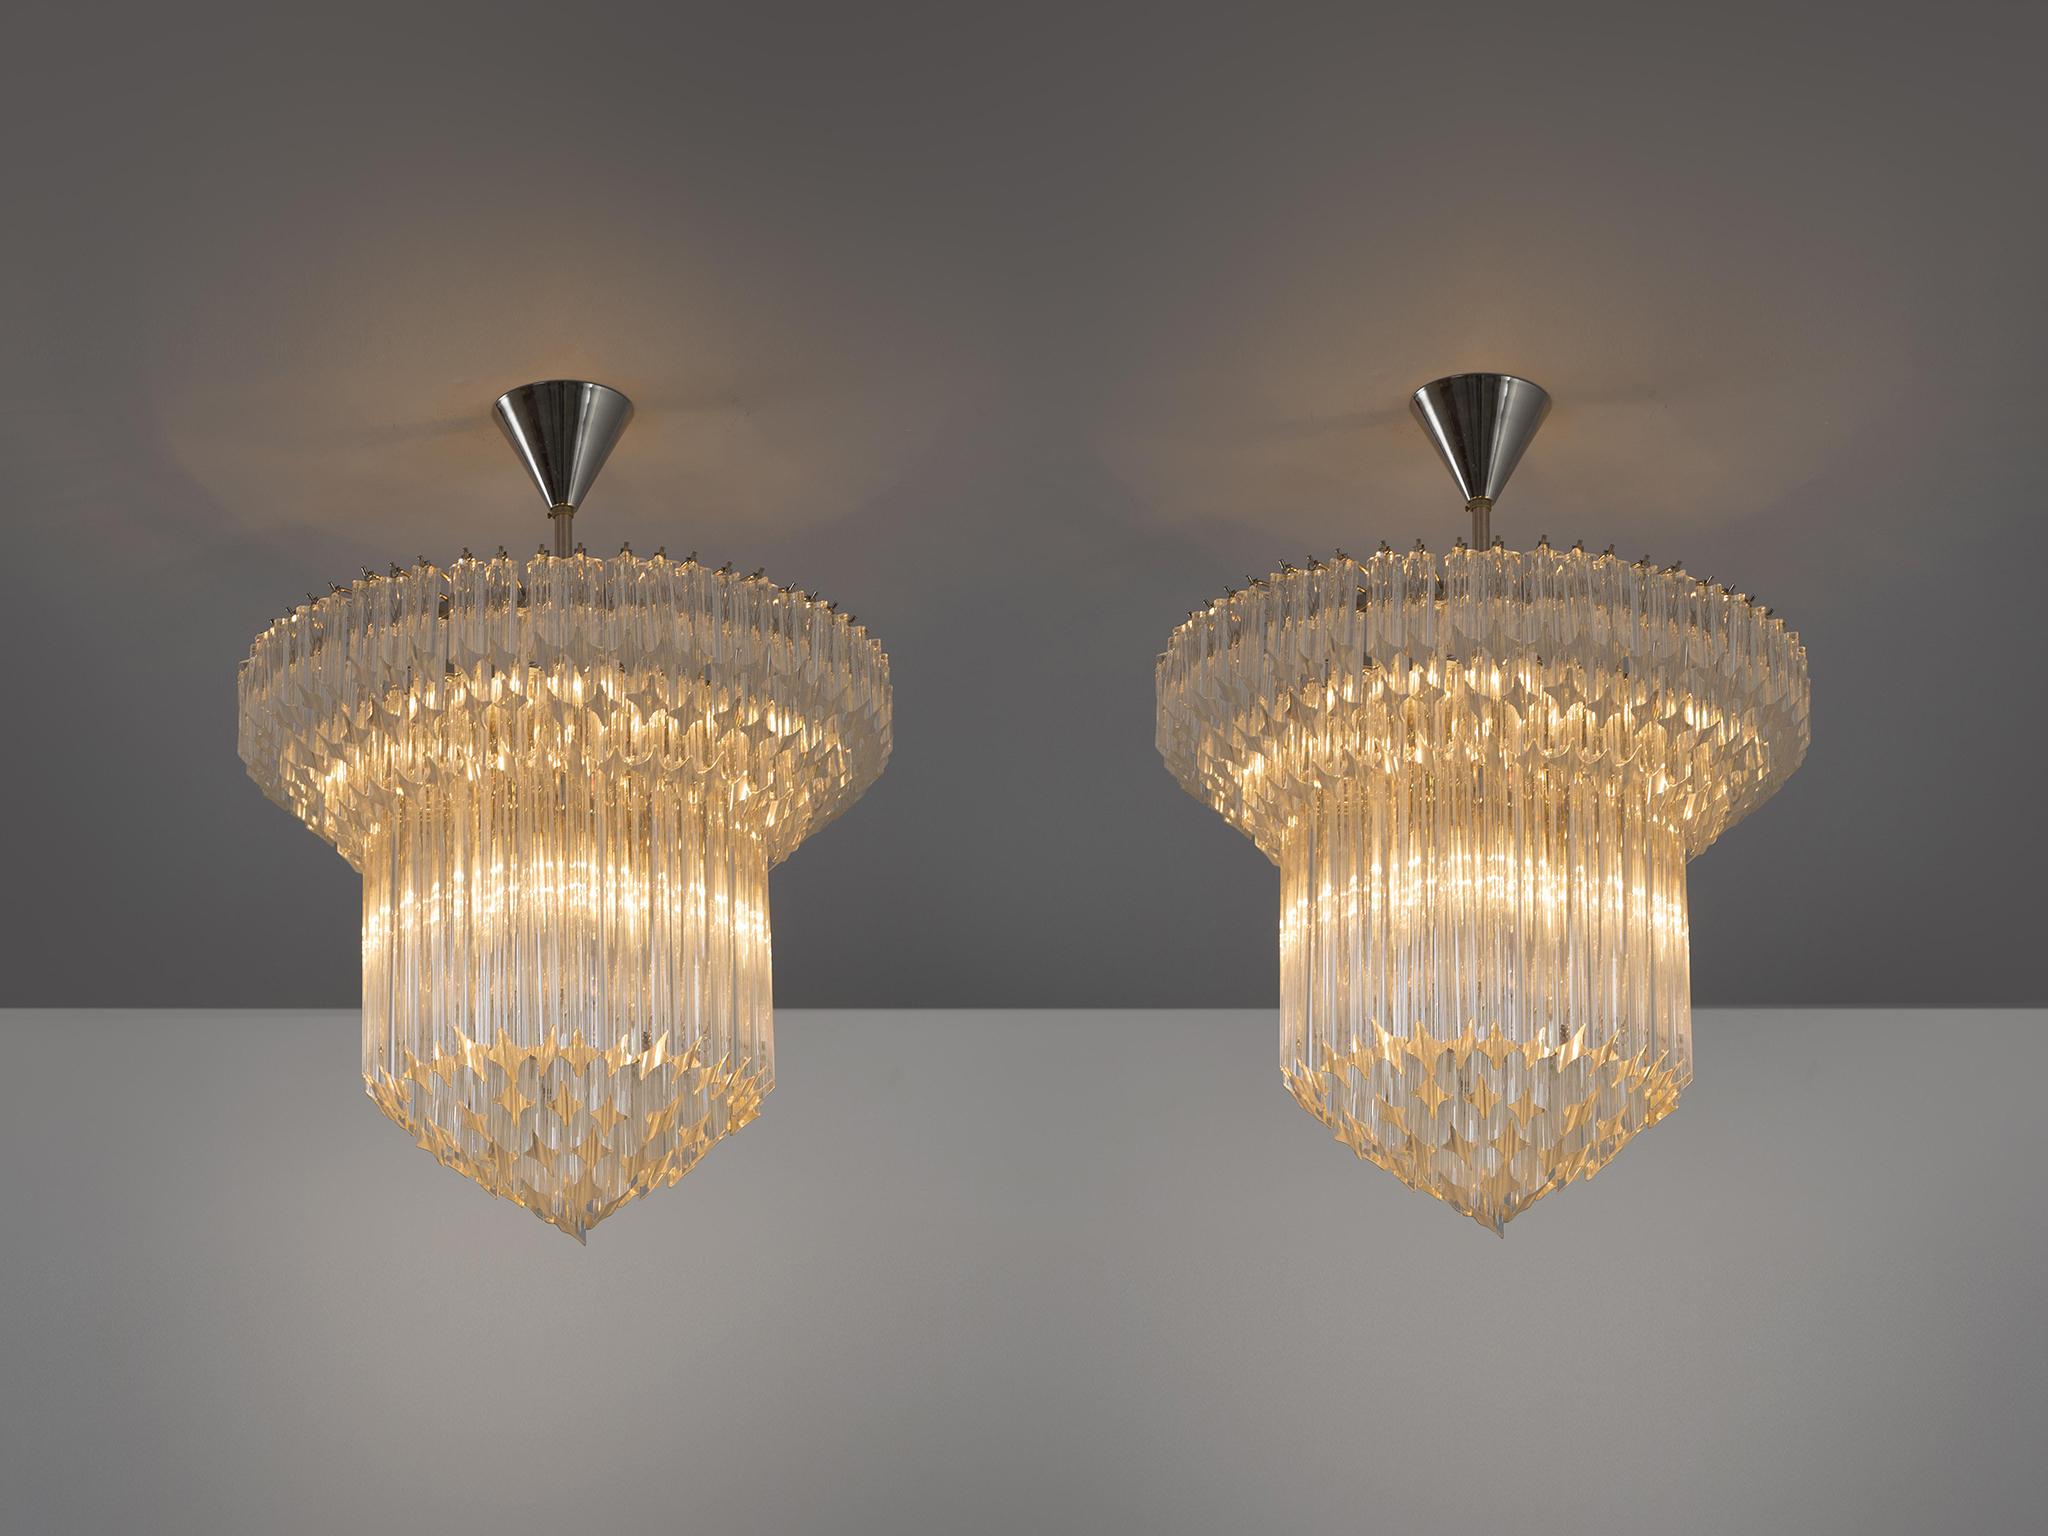 Venini, chandeliers, glass, polished nickel, Italy, 1970s.

Very elegant Venini chandeliers in glass and nickel. These high quality original 1970s productions still show the excellent quality they have been made with during that time. Coming from an